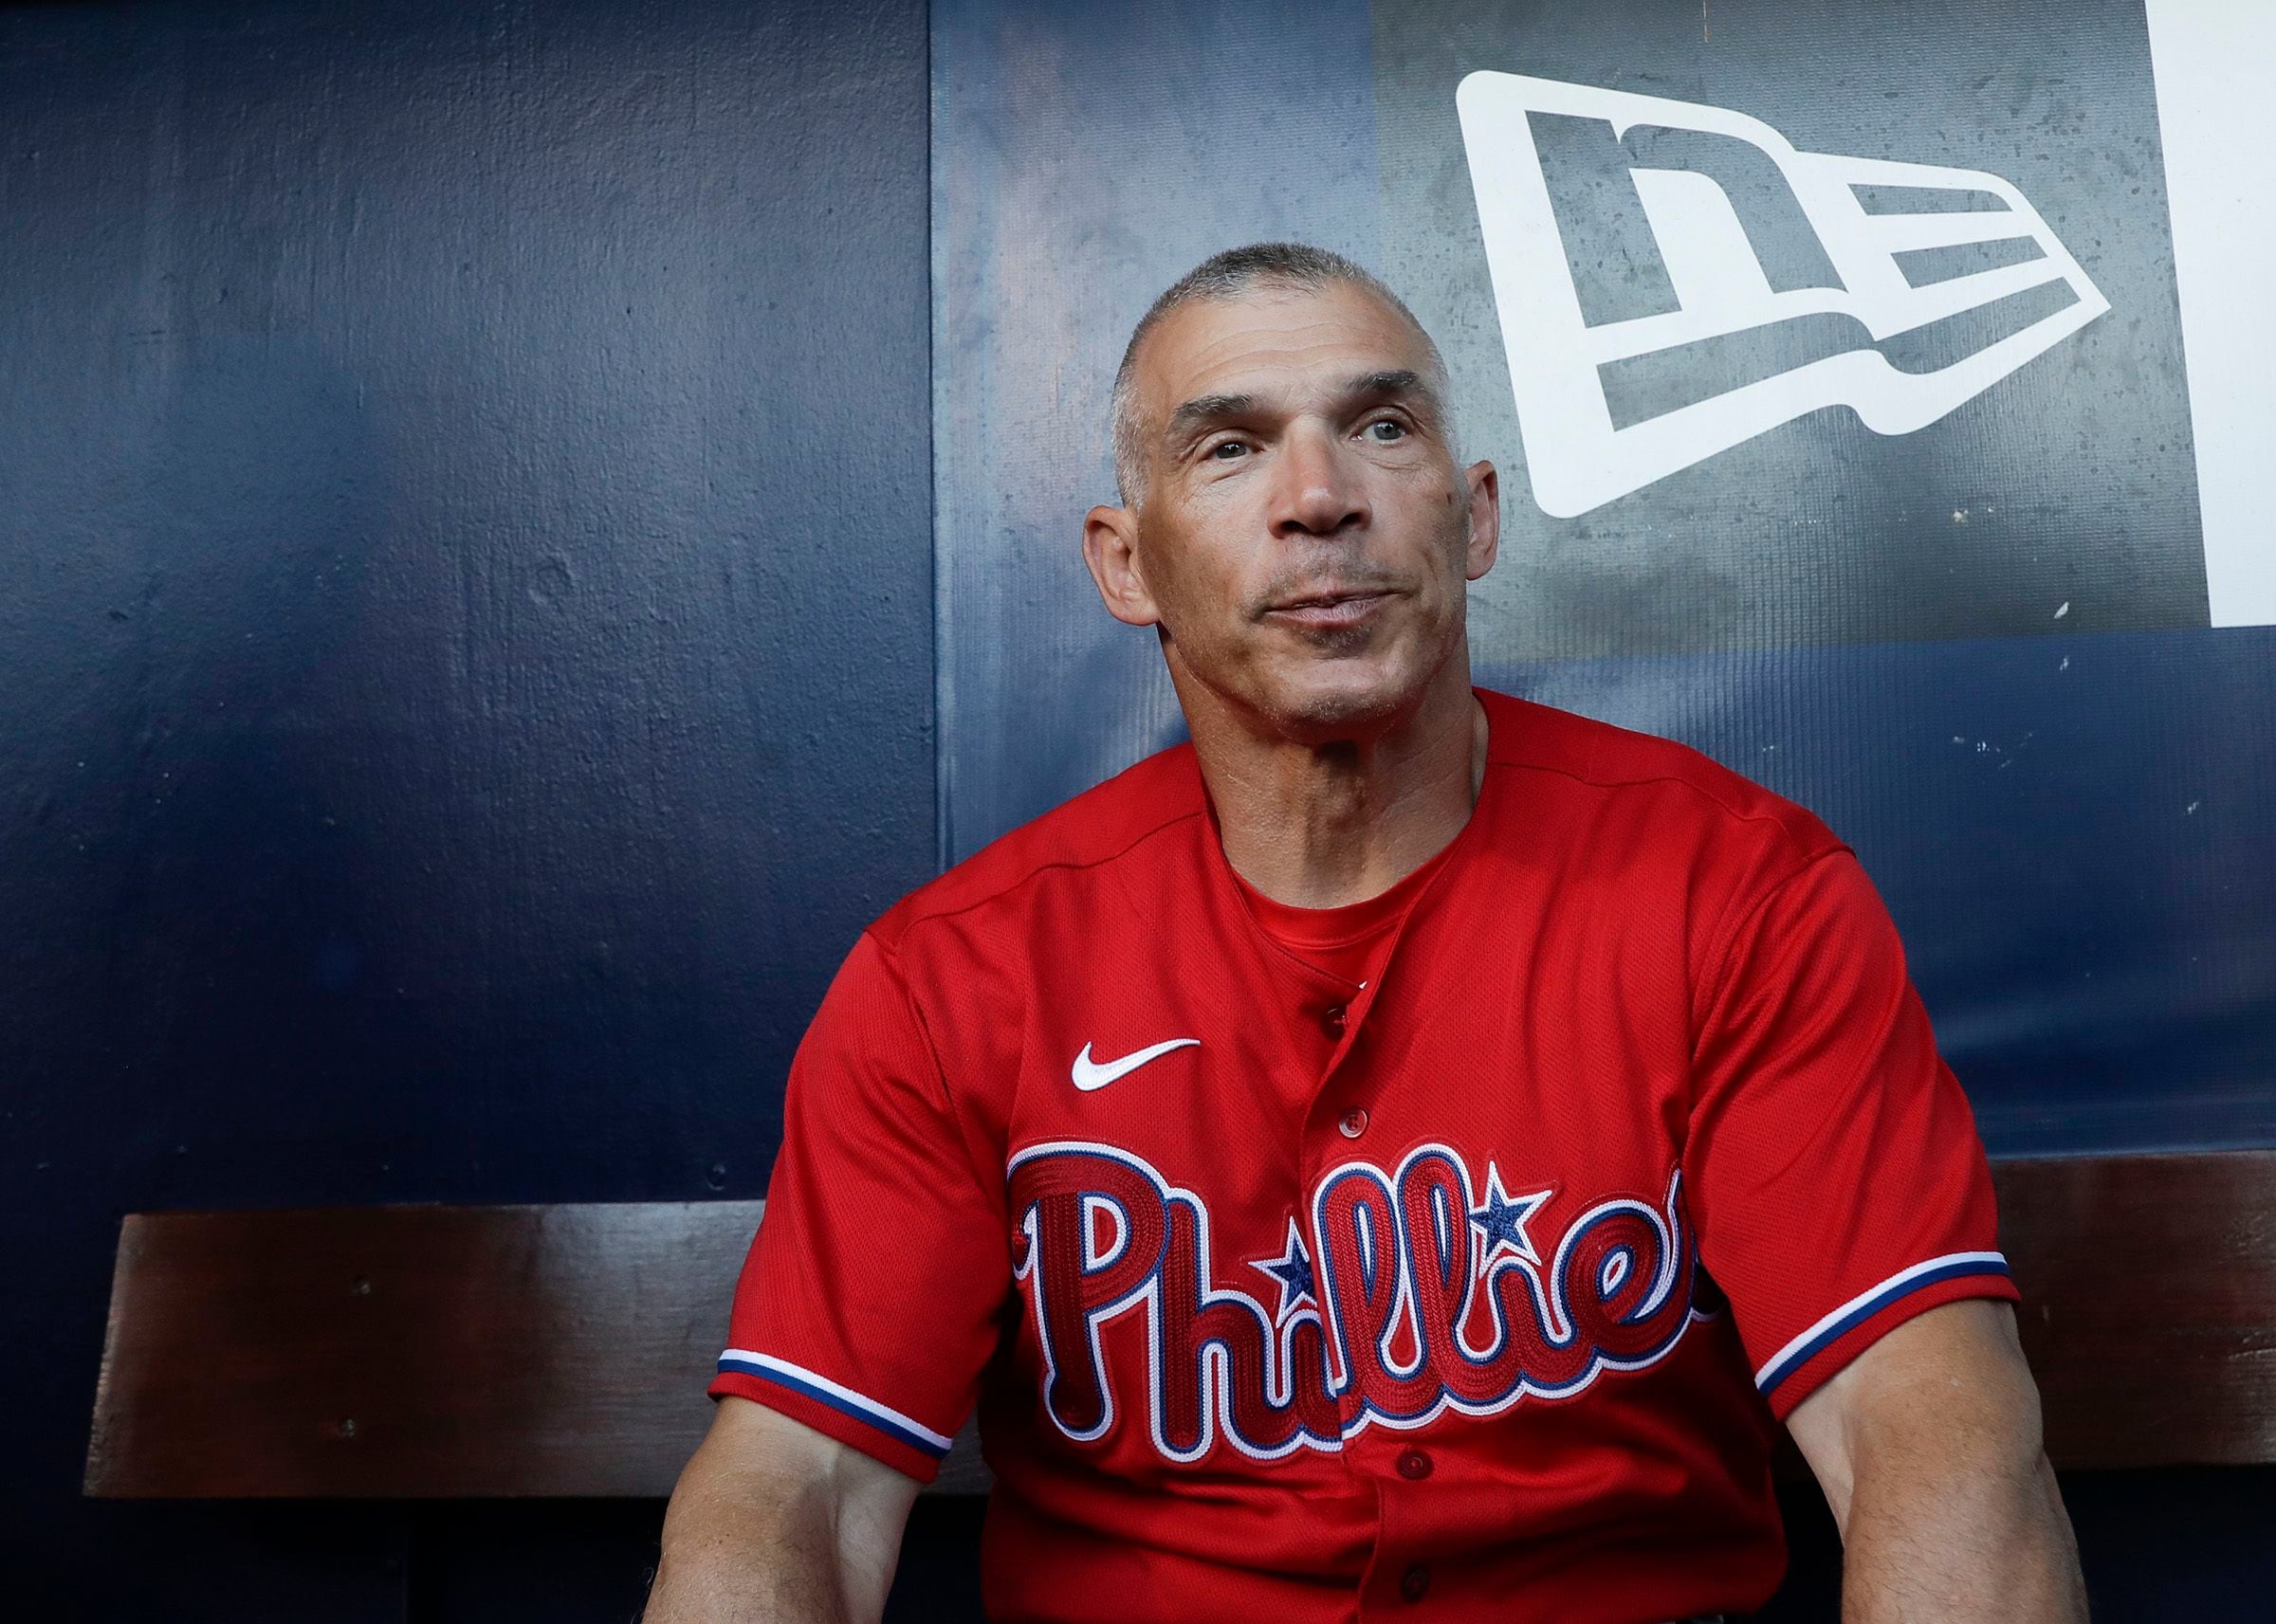 Joe Girardi Trots Out a New Look for the Yankees - The New York Times